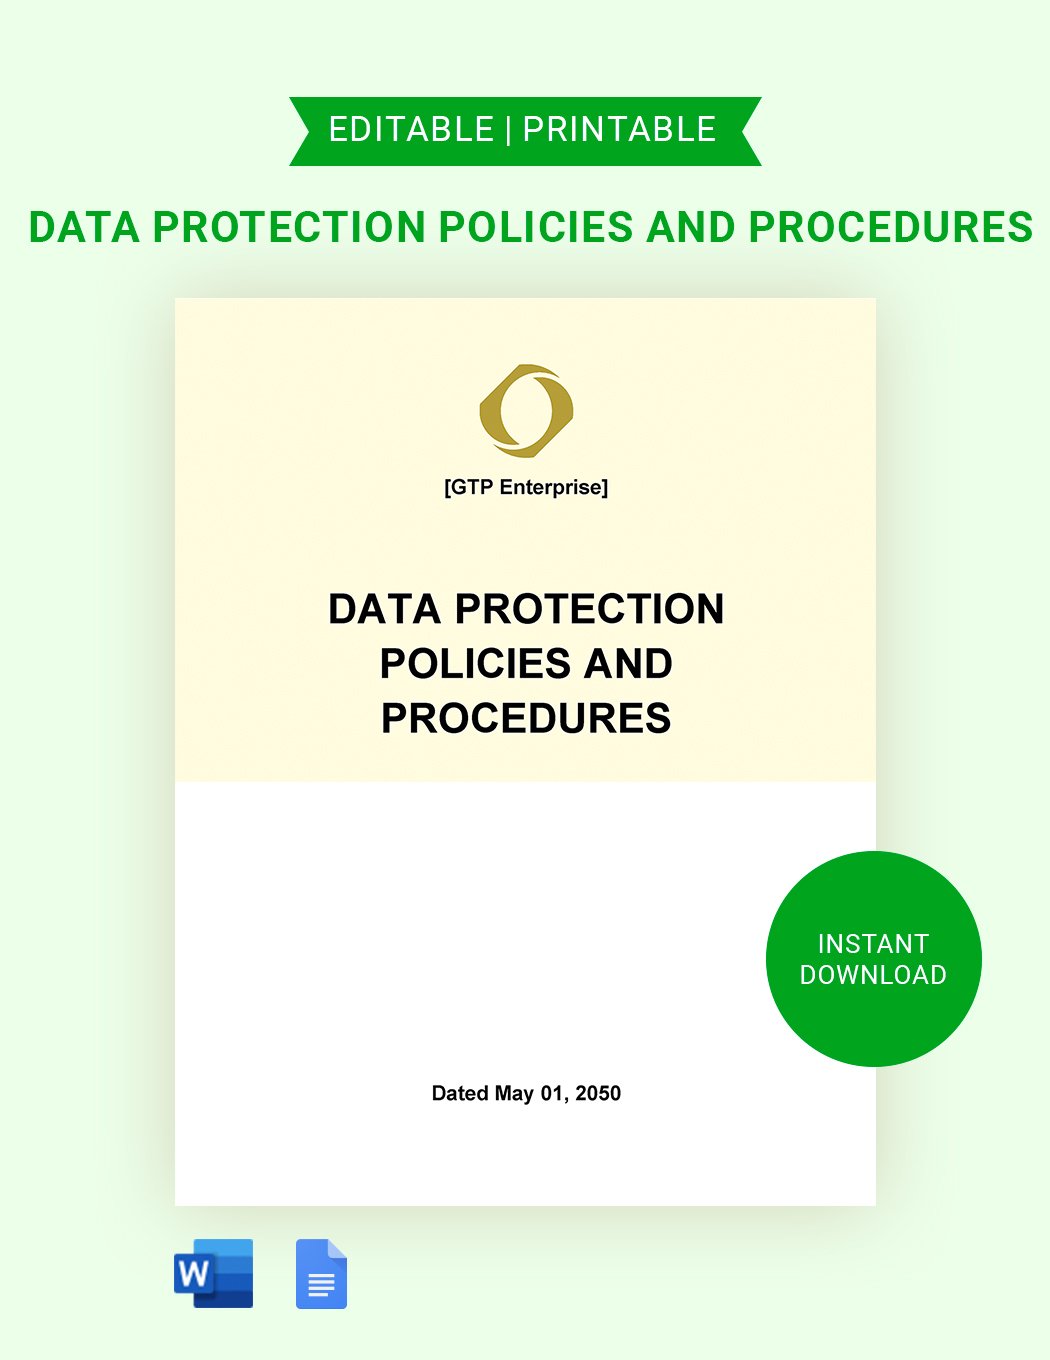 Free Data Protection Policies And Procedures in Word, Google Docs